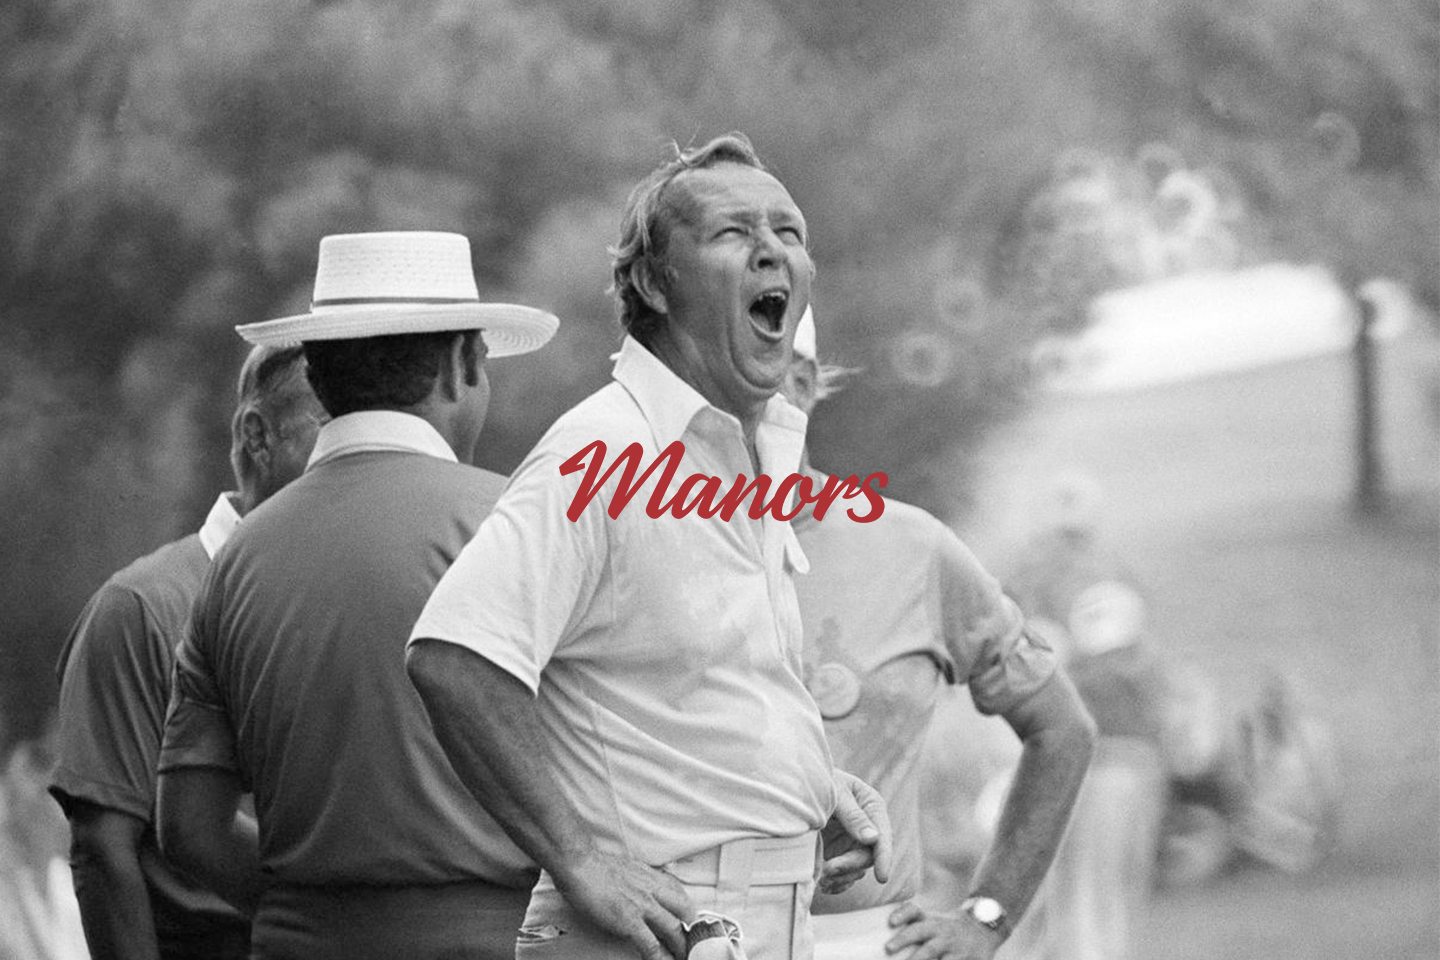 Manors Bridging the Worlds of Golf Fashion and Streetwear